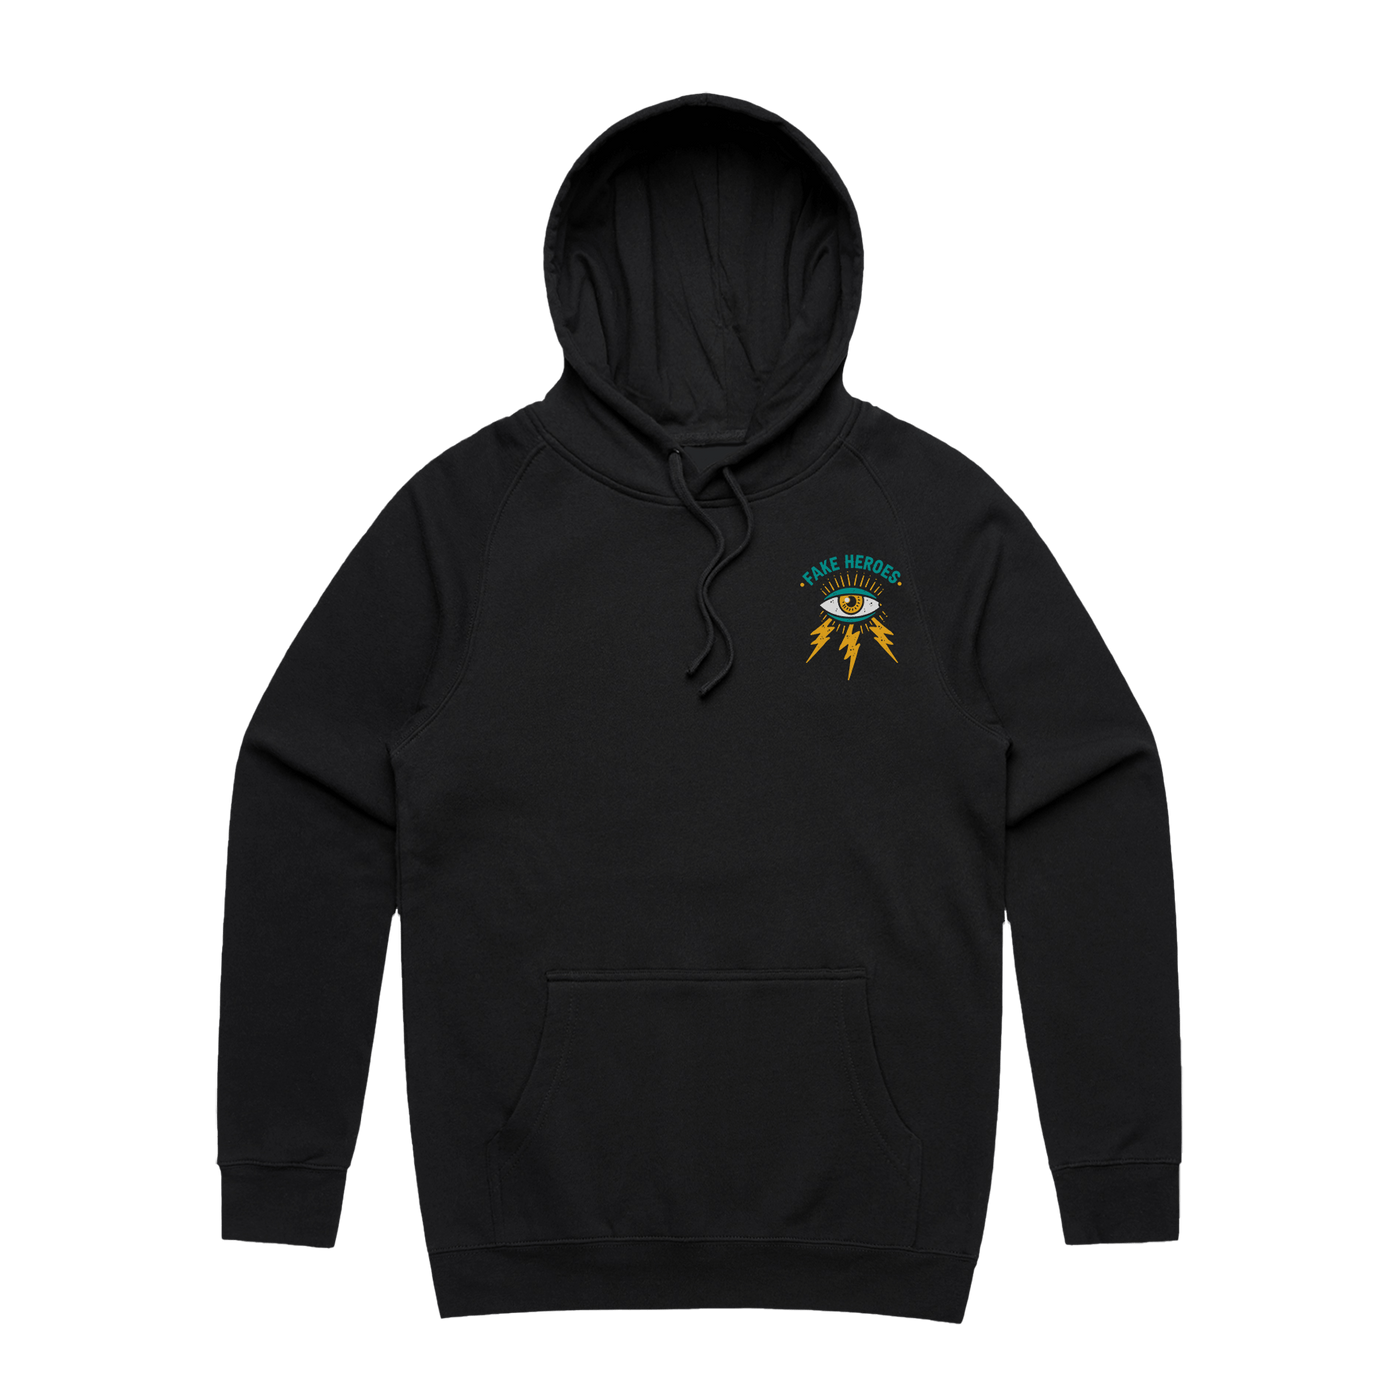 Into The Storm Hoody